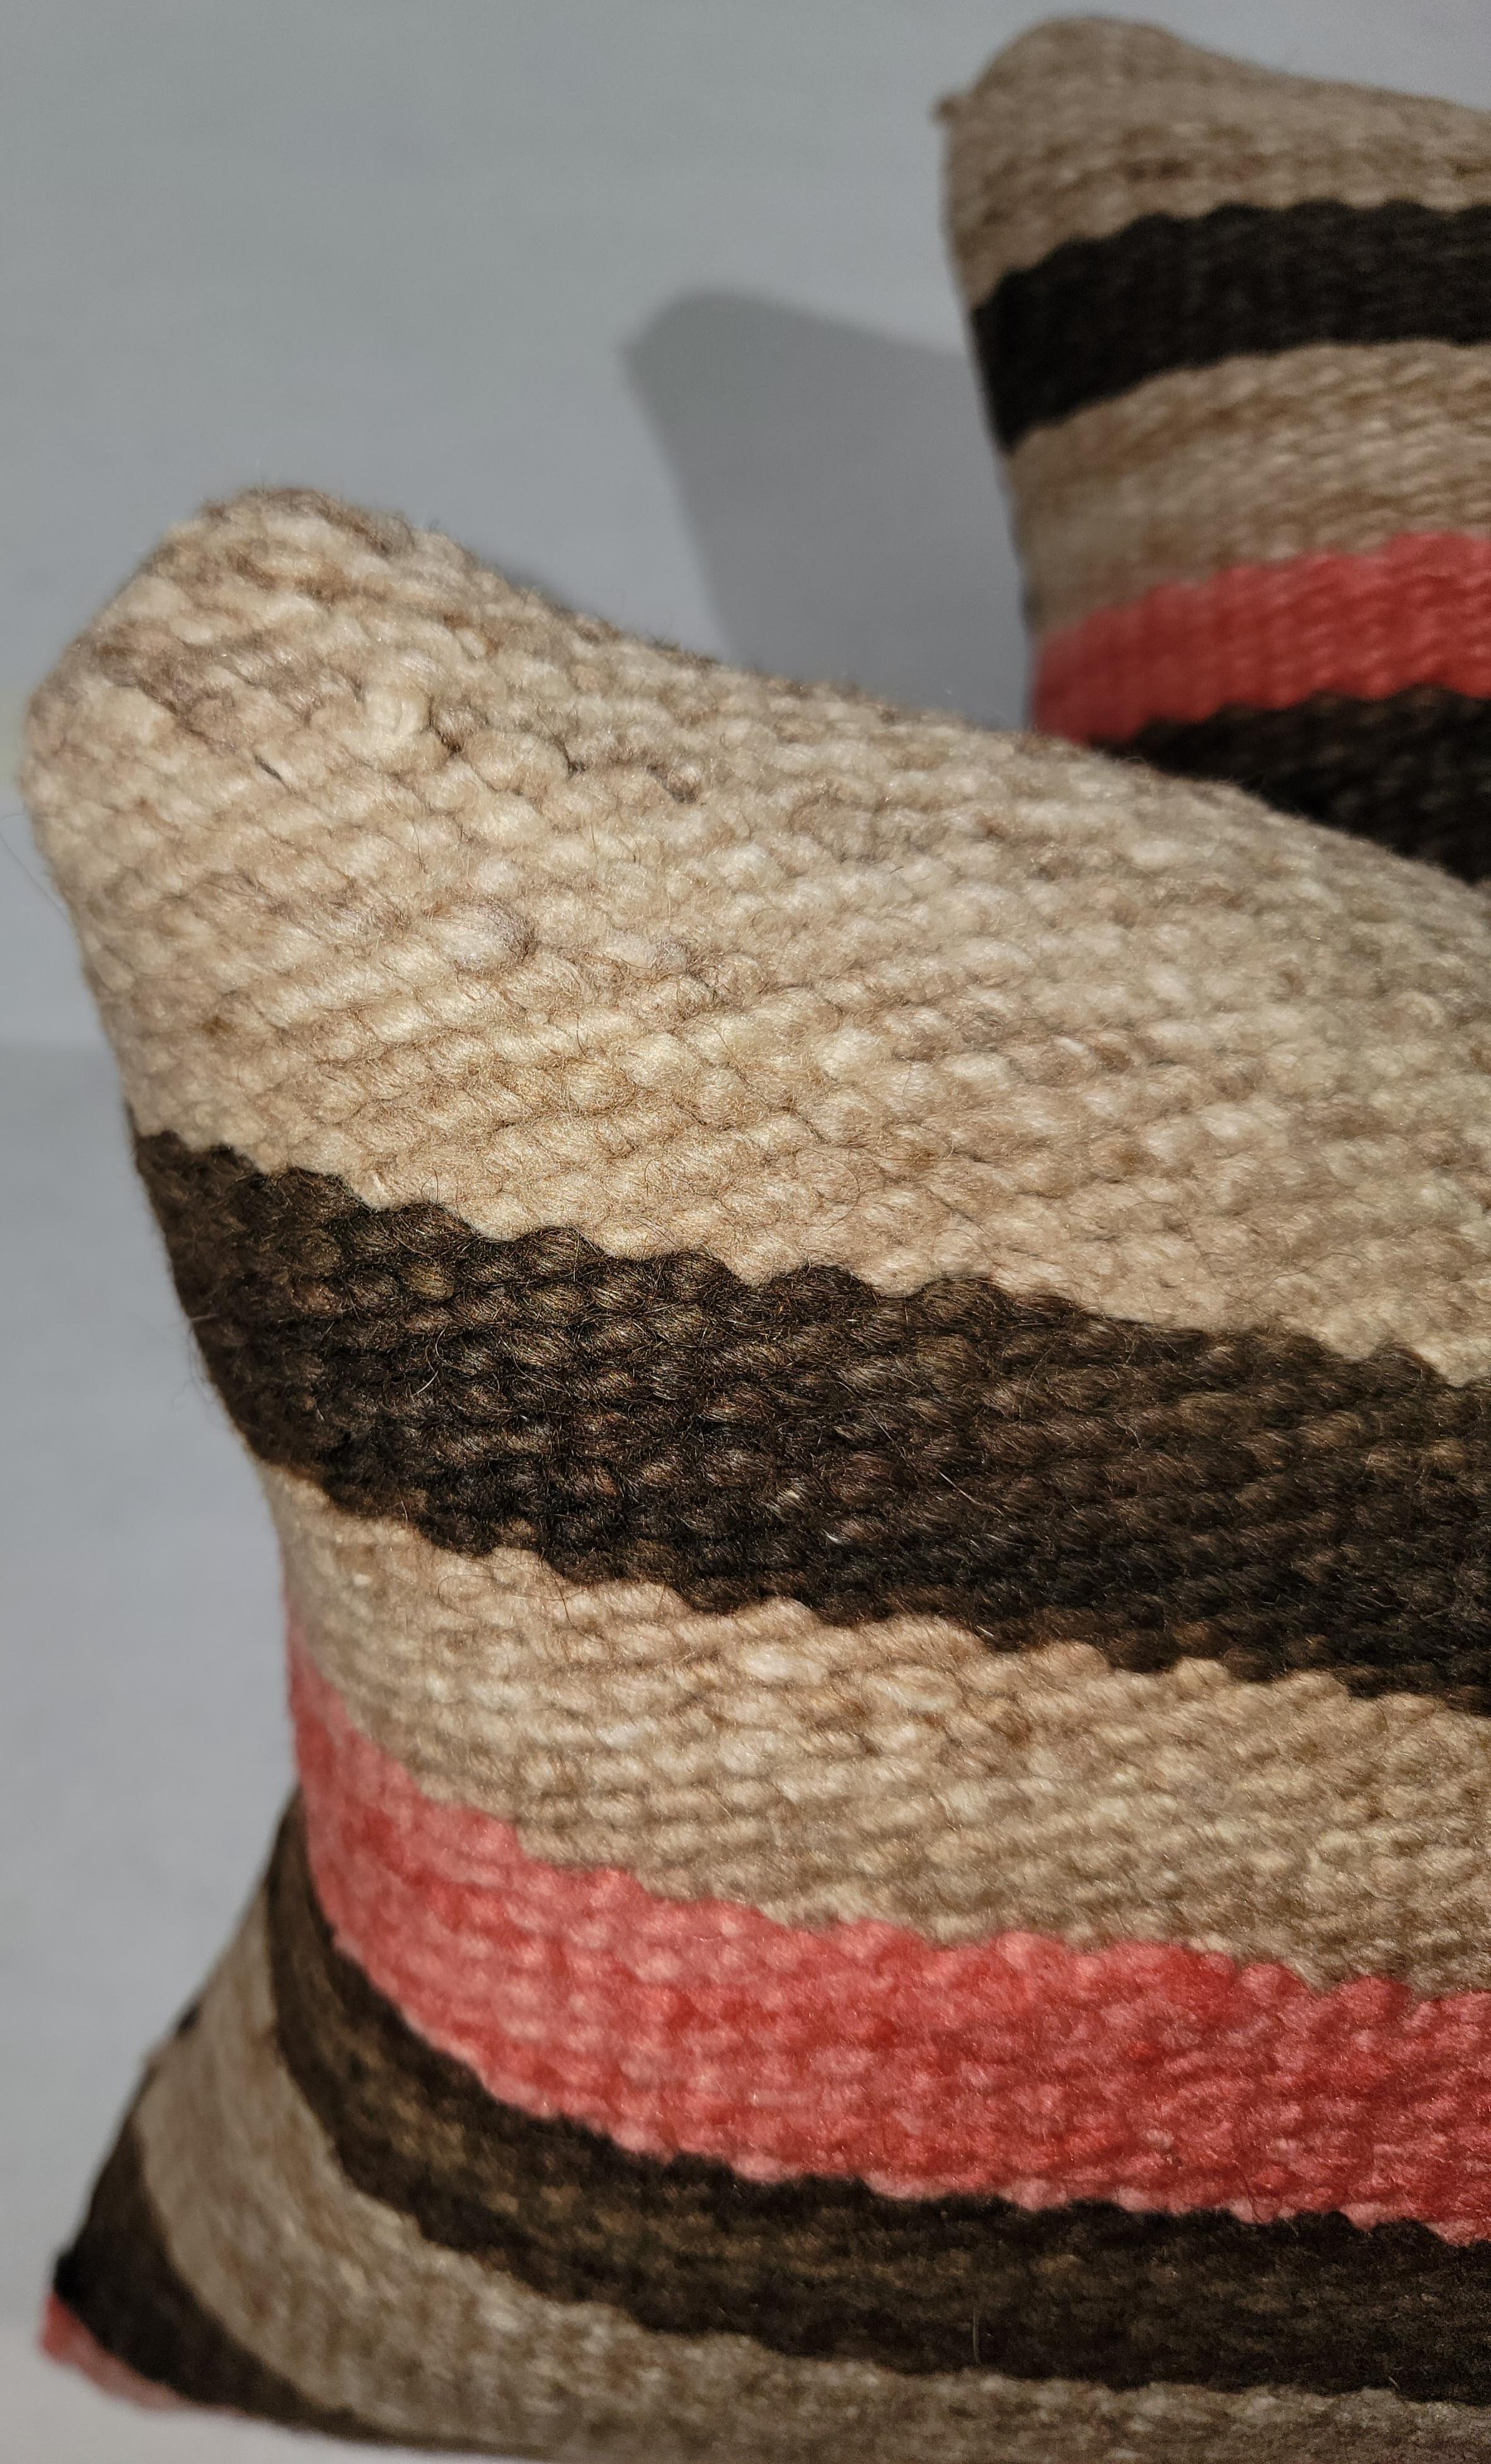 Pair Of Wool Striped Saddle Blanket Pillows.
Brown linen backing compliments the chosen saddle blanket colors. This saddle blankets has been professionally laundered. There is a custom down and feather made insert for each pillow. 